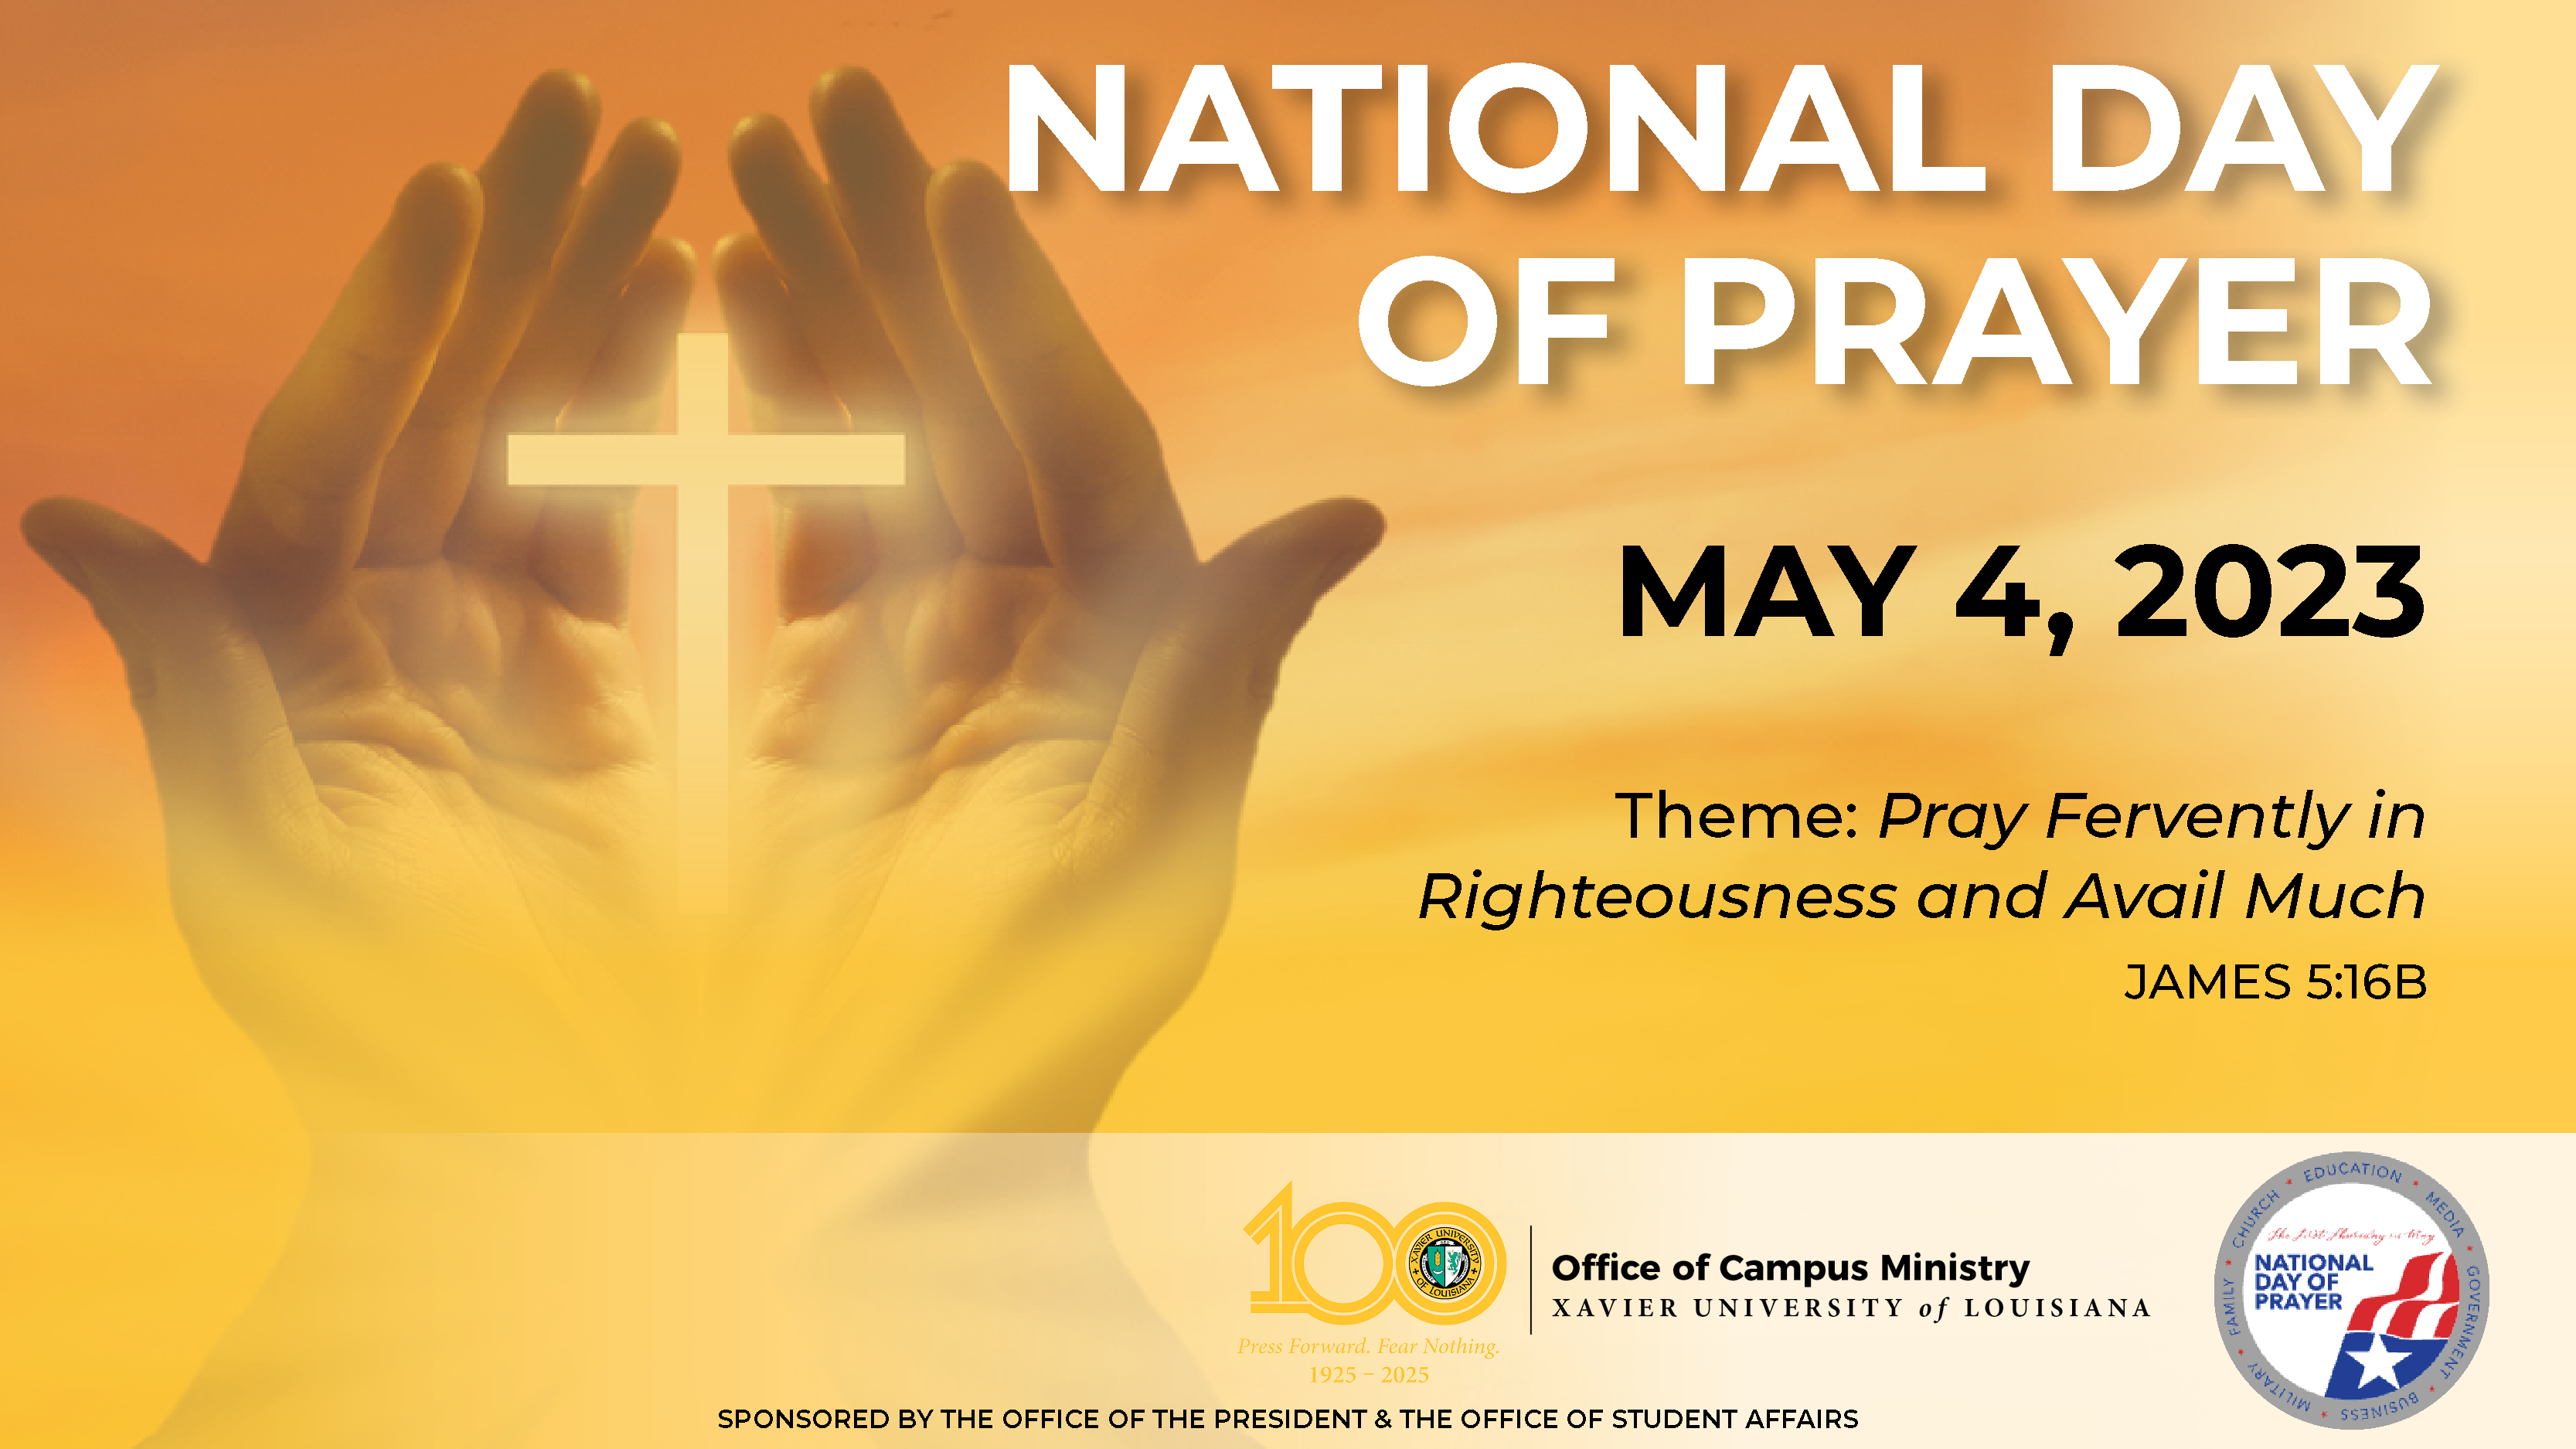 A reflection from Father Victor Laroche, University Chaplain and Special Assistant to the President for Xavier University of Louisiana, the nation's only historically Black and Catholic institution, celebrates National Day of Prayer on May 4, 2023, inviting everyone to offer prayer and thanks in their own way. Founded in 1925 by St. Katharine Drexel and the Sisters of the Blessed Sacrament, Xavier has always welcomed people of all races and creeds and promotes a more just and humane society for all. The letter from Dr. Reynold Verret, President of Xavier University, encourages Xavierites to join the nation in prayer on this annual observance and promotion of prayer held on the first Thursday of May. Prayer can be done in many forms, either communally or individually, for needs and hopes, community, nation, and the world, or in thanksgiving. All prayer is sweet to the divine. Catholic Identity